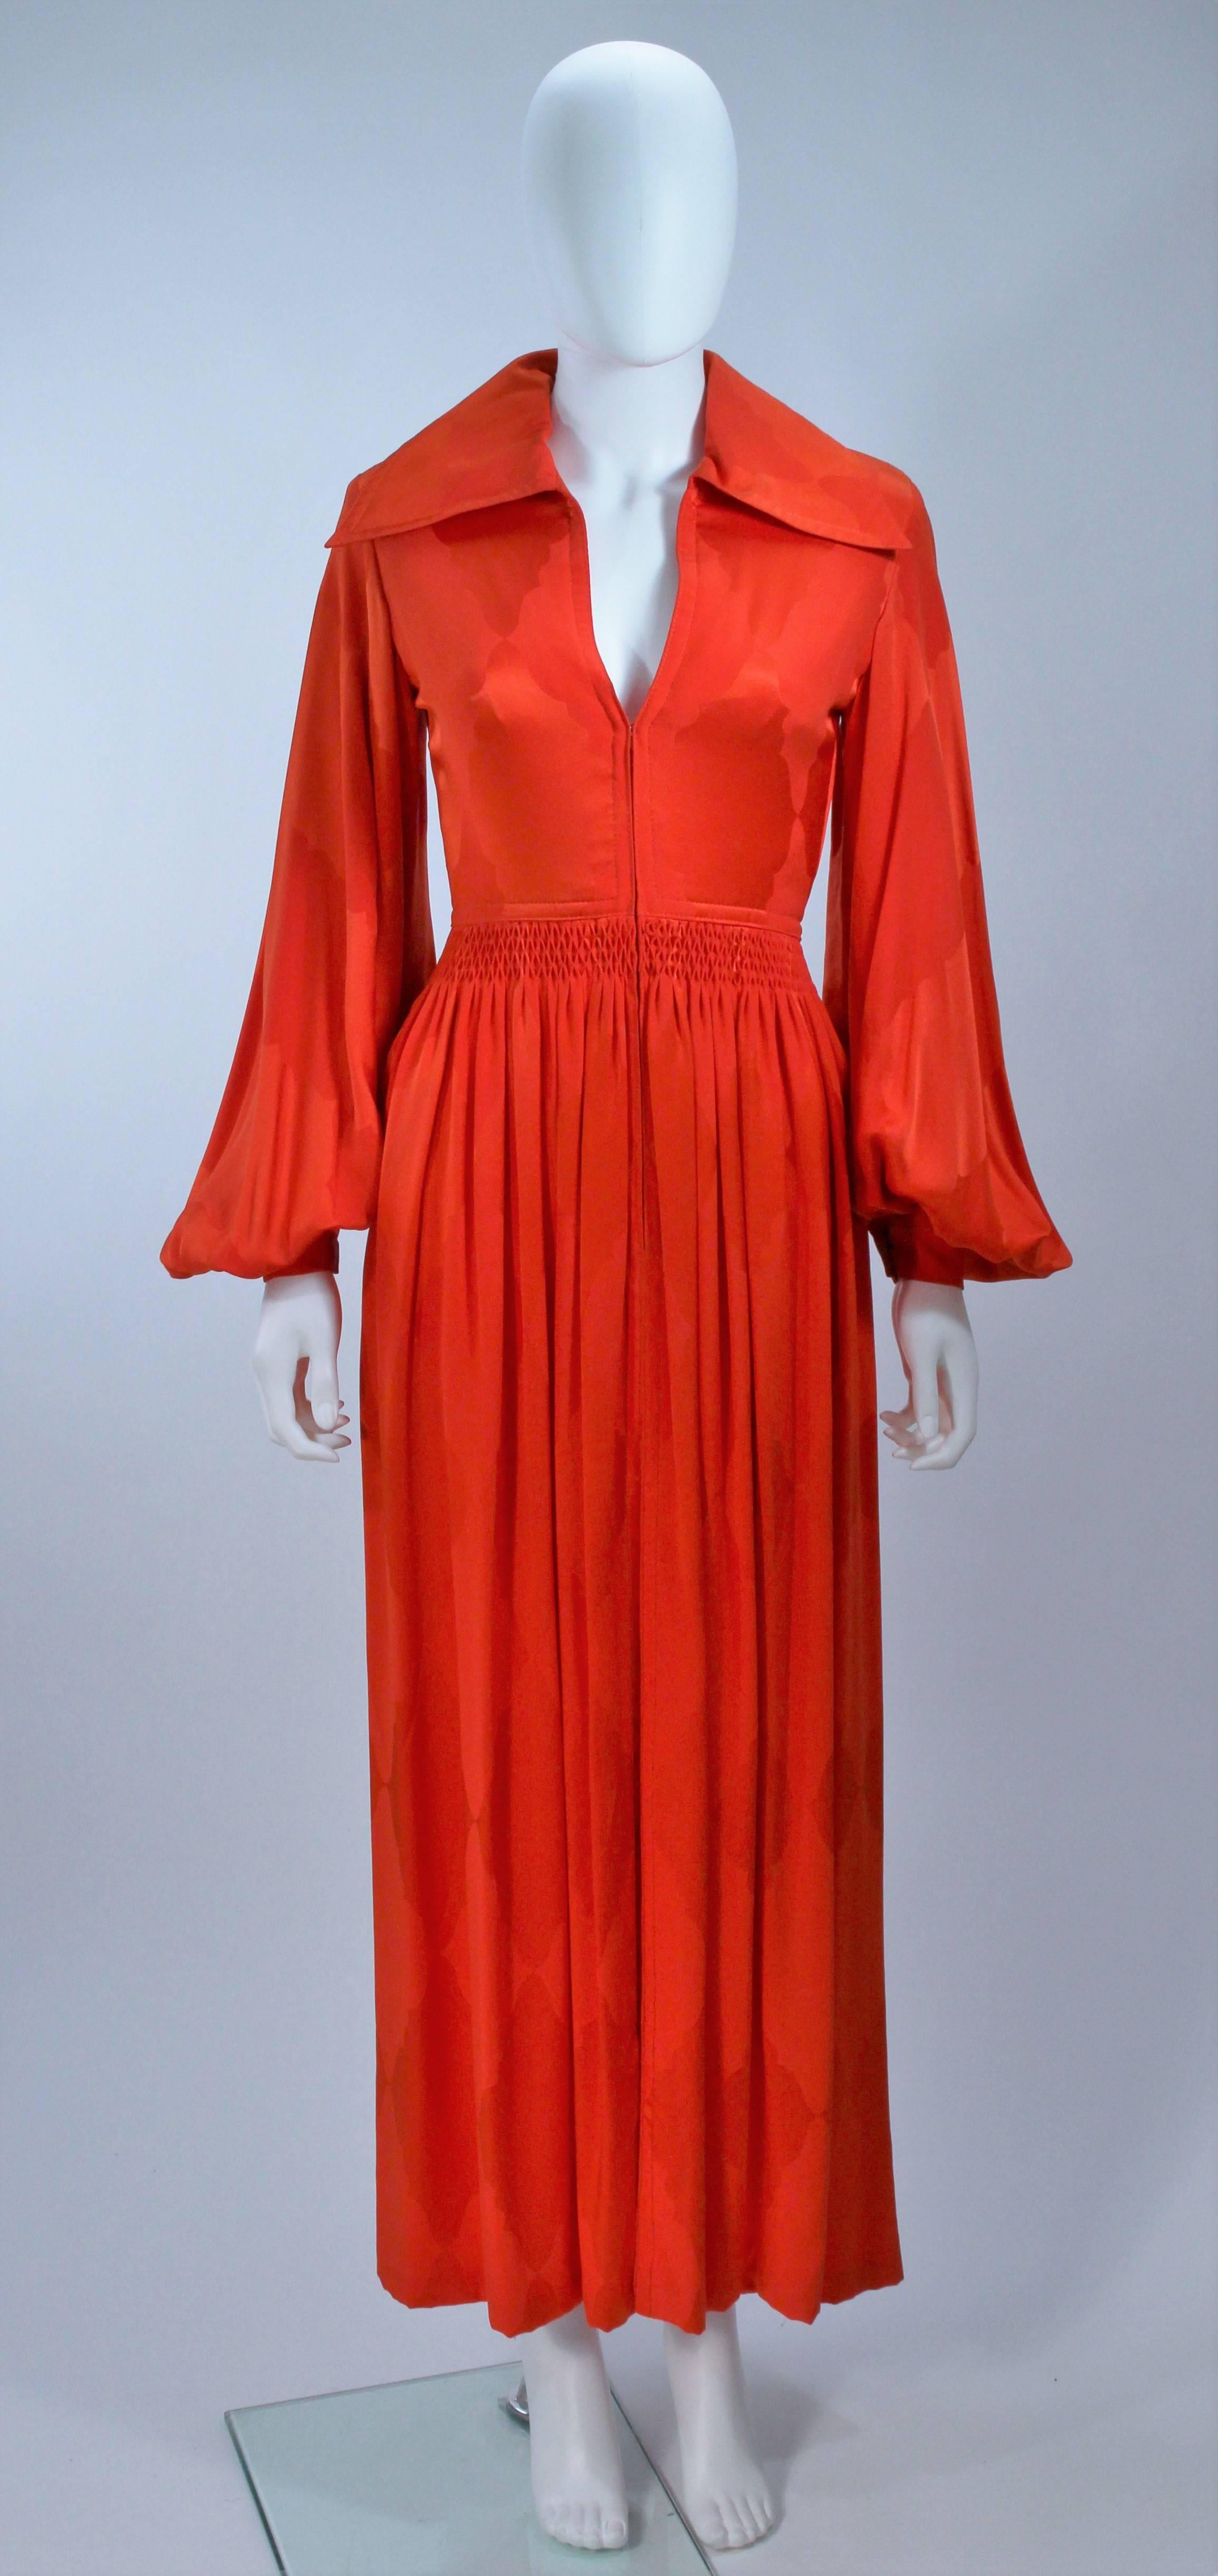  This Galanos  gown is composed of  bright orange silk and features billow sleeves, with a tacked detail waist. There is a center front zipper closure. In excellent vintage condition. 

  **Please cross-reference measurements for personal